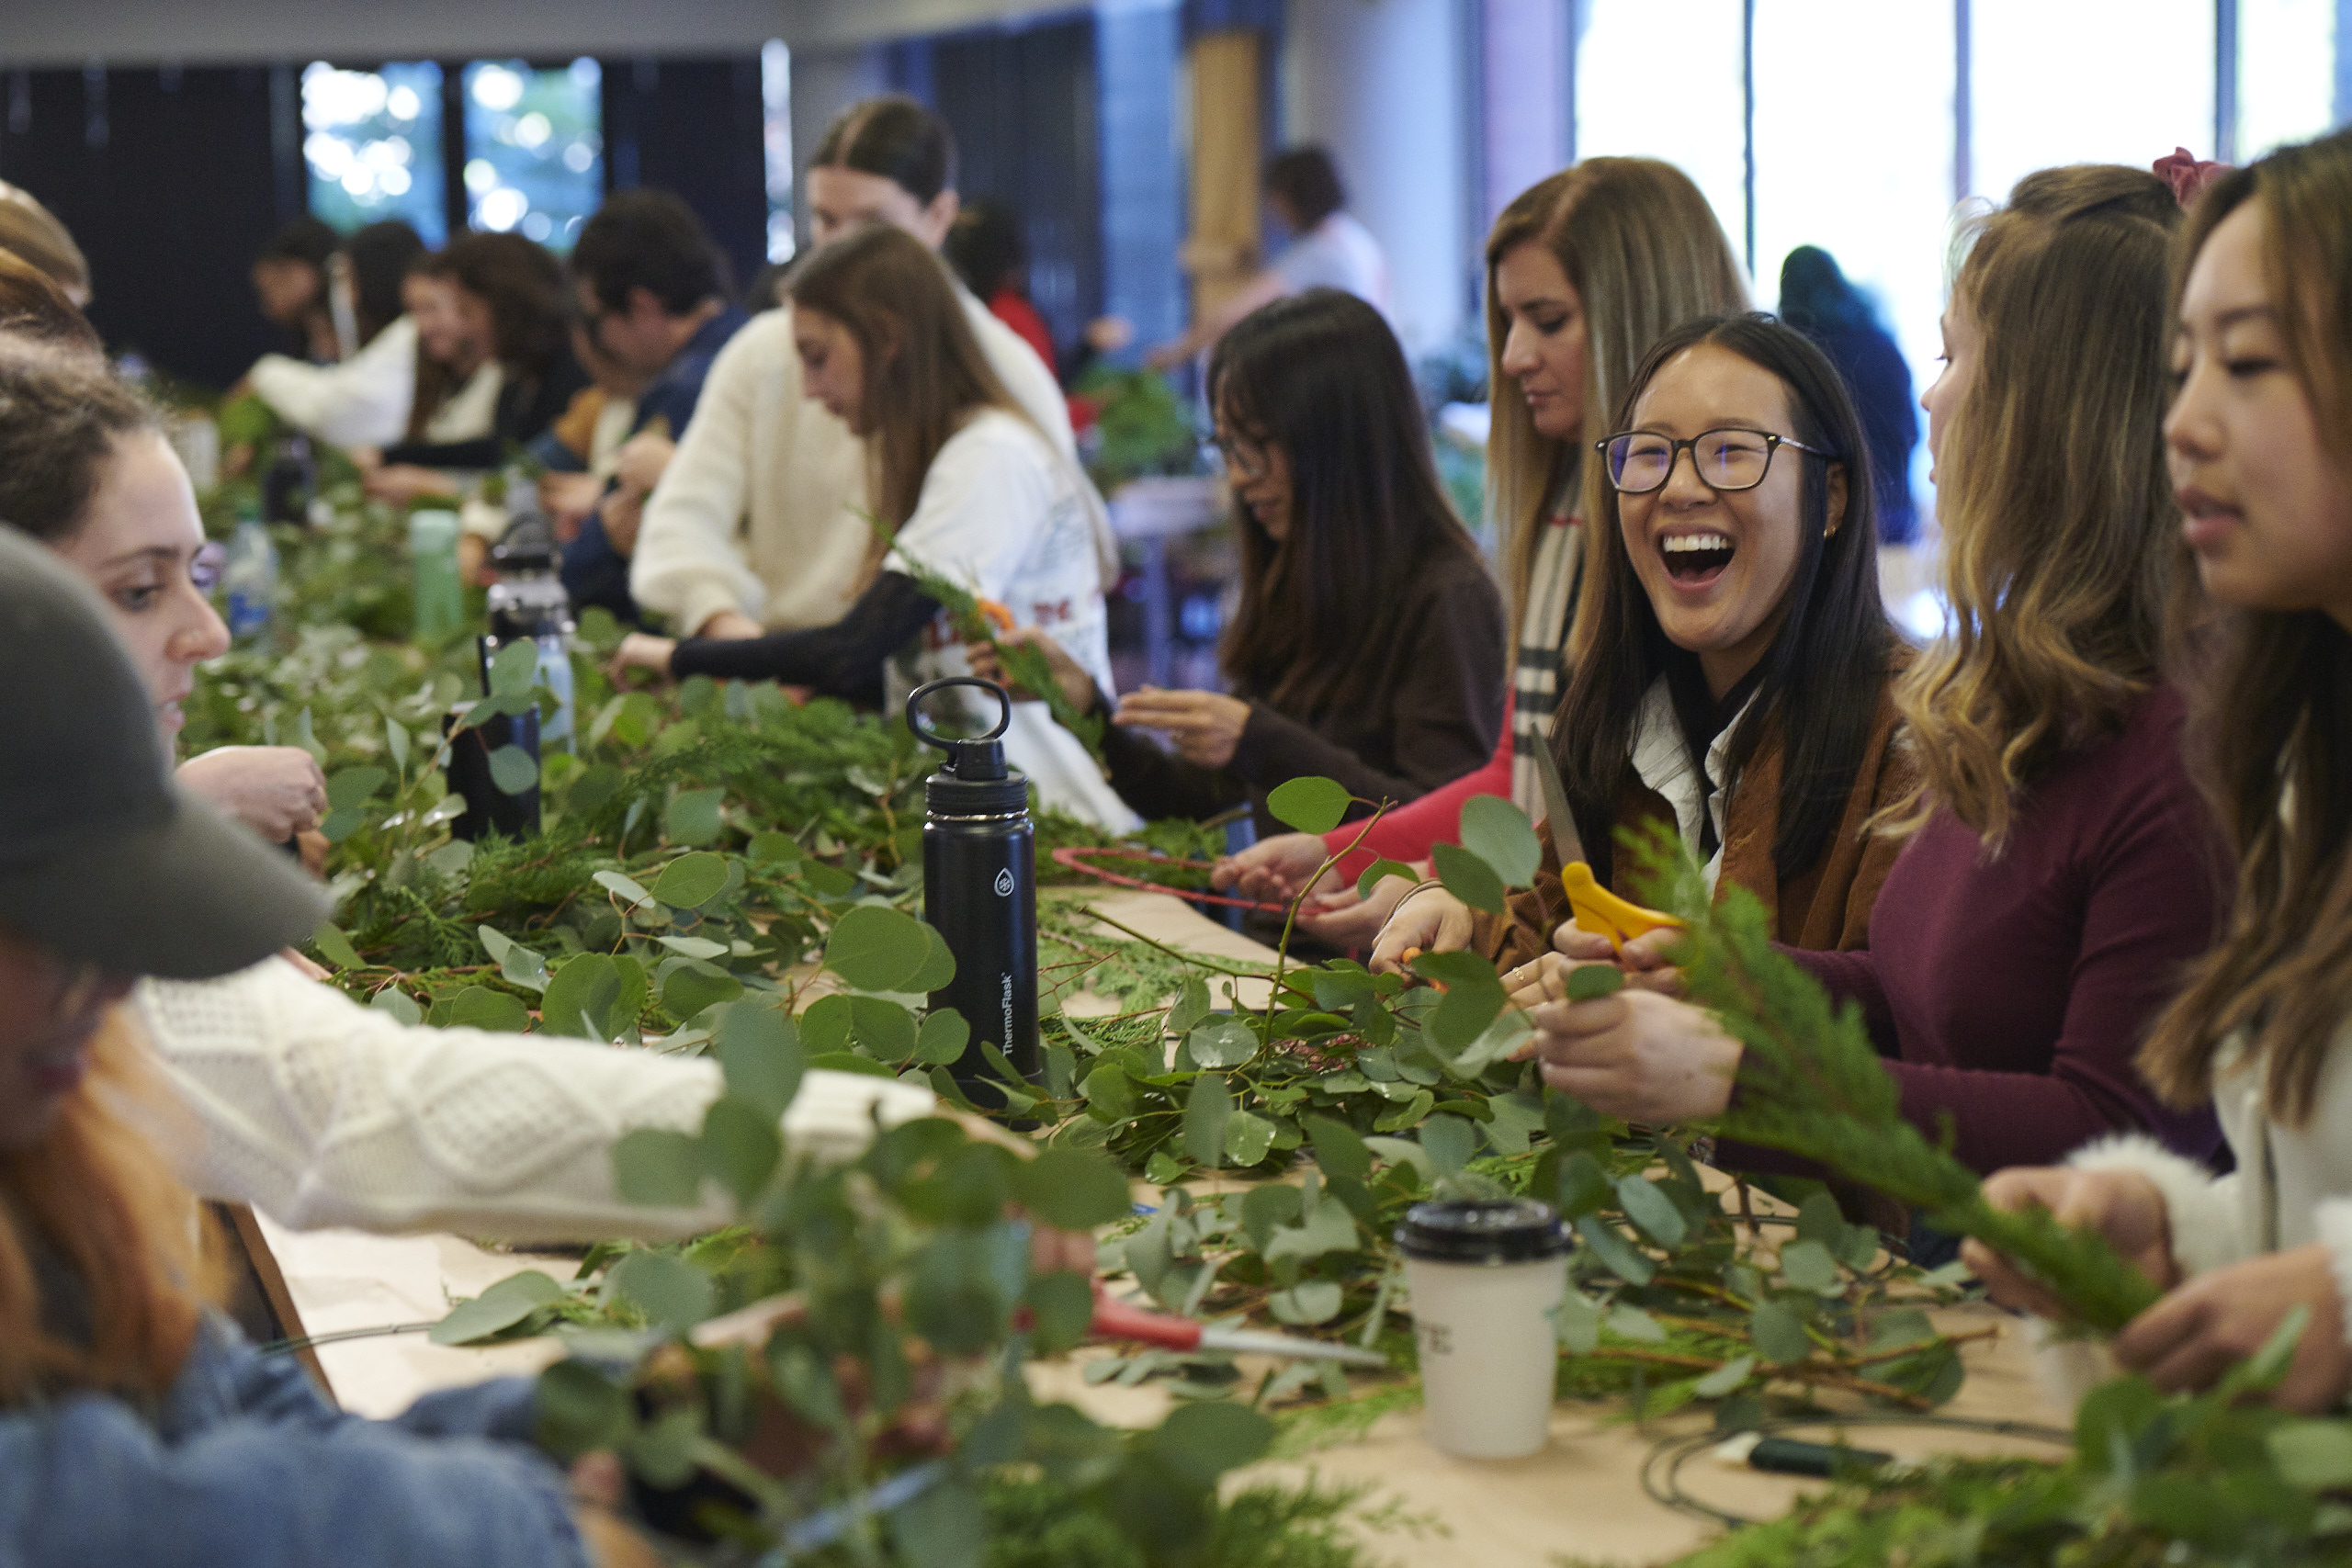 Sarah Mayhue at table making wreaths with other LS&Co. employees